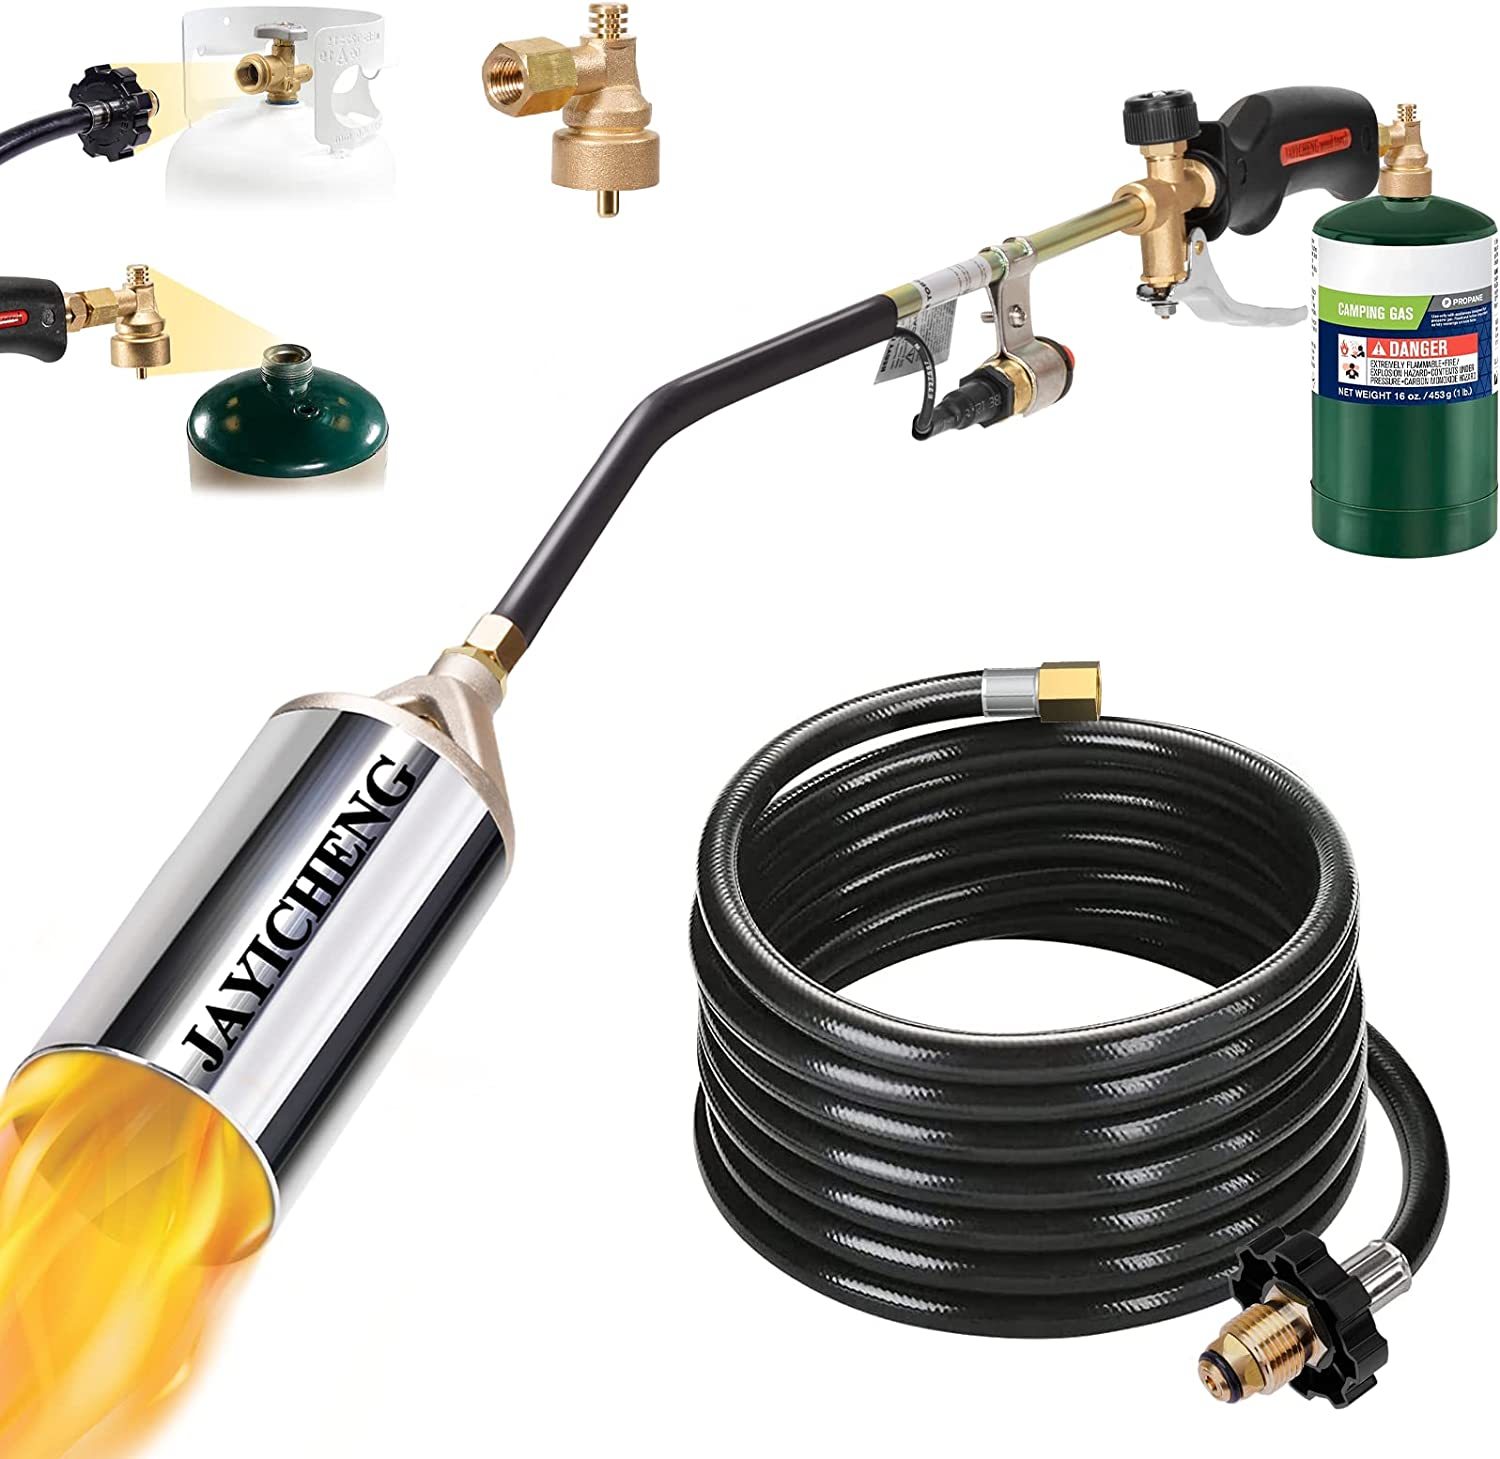 Primary image for The Following Products Are Available: Propane Torch Weed, Melting Ice Snow.